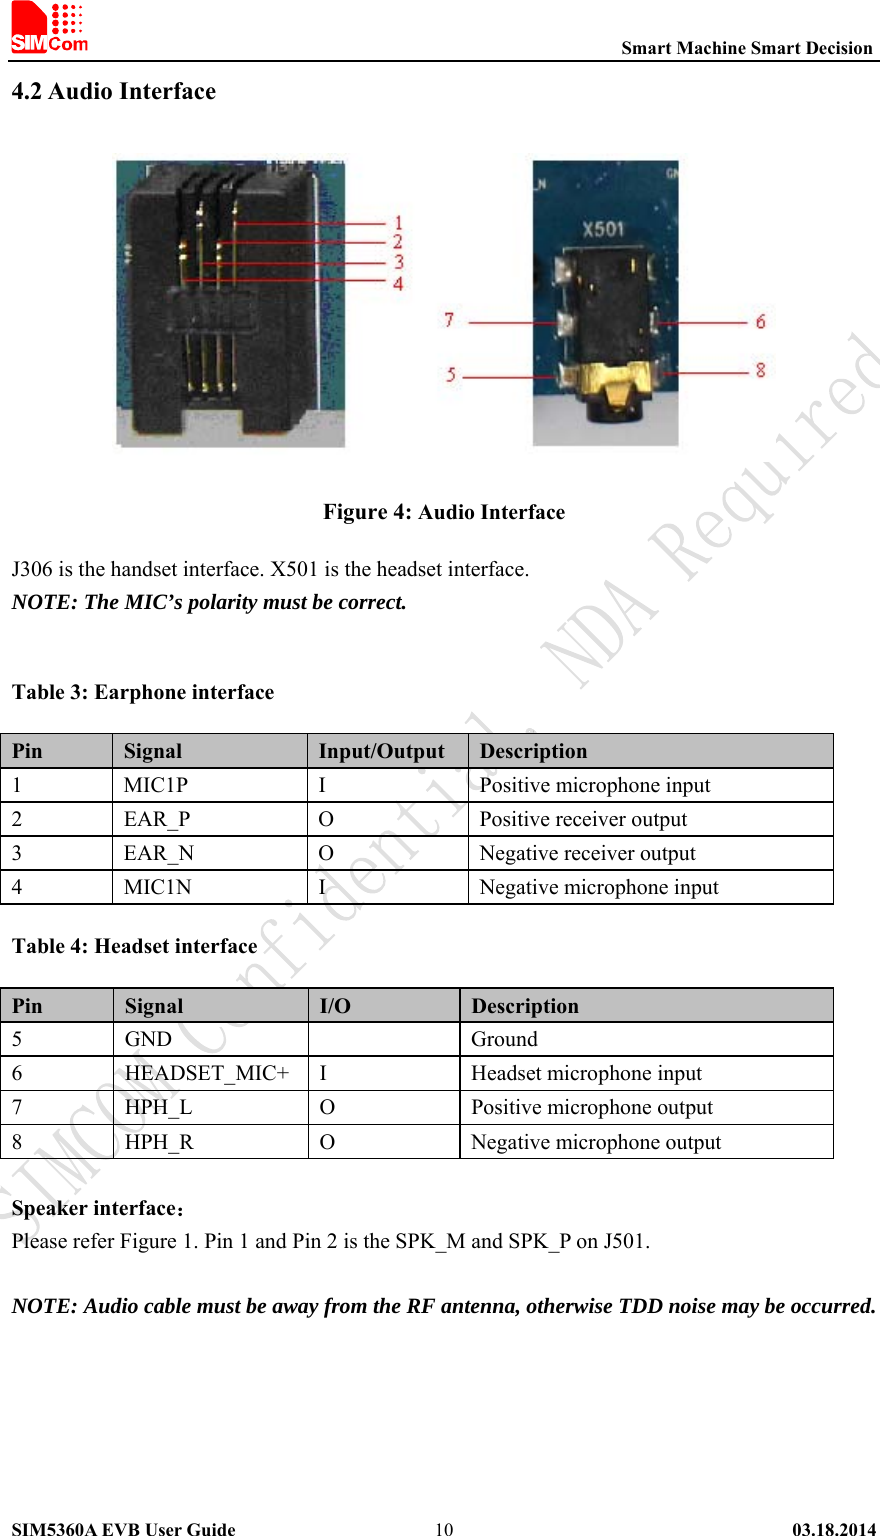                                                          Smart Machine Smart Decision SIM5360A EVB User Guide   03.18.2014   104.2 Audio Interface  Figure 4: Audio Interface J306 is the handset interface. X501 is the headset interface. NOTE: The MIC’s polarity must be correct.  Table 3: Earphone interface Pin  Signal  Input/Output  Description 1  MIC1P  I  Positive microphone input   2  EAR_P  O  Positive receiver output 3  EAR_N  O  Negative receiver output 4  MIC1N  I  Negative microphone input Table 4: Headset interface Pin  Signal  I/O  Description 5  GND    Ground 6  HEADSET_MIC+  I Headset microphone input   7  HPH_L  O  Positive microphone output 8  HPH_R  O  Negative microphone output  Speaker interface： Please refer Figure 1. Pin 1 and Pin 2 is the SPK_M and SPK_P on J501.  NOTE: Audio cable must be away from the RF antenna, otherwise TDD noise may be occurred.   